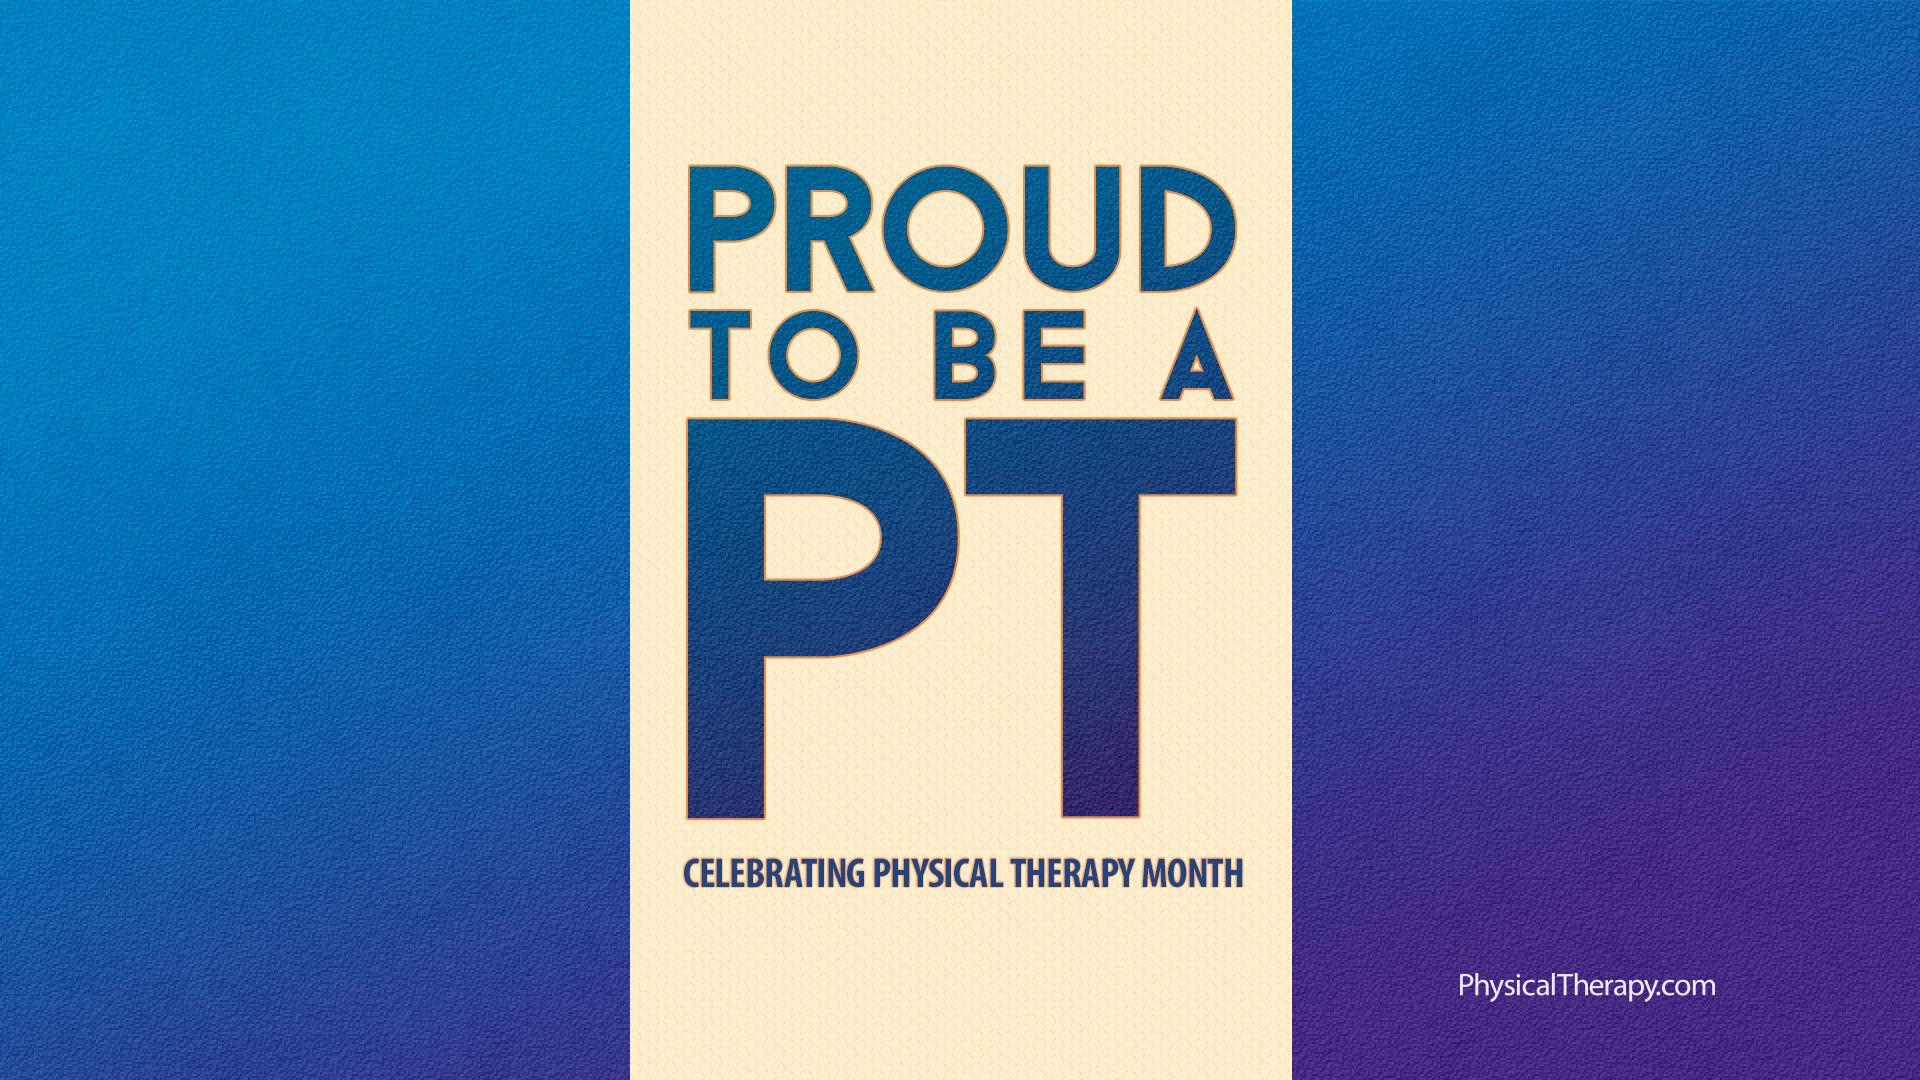 PT Month Wallpaper PhysicalTherapy.com: Online Physical Therapy CEUs & Physical Therapy Jobs